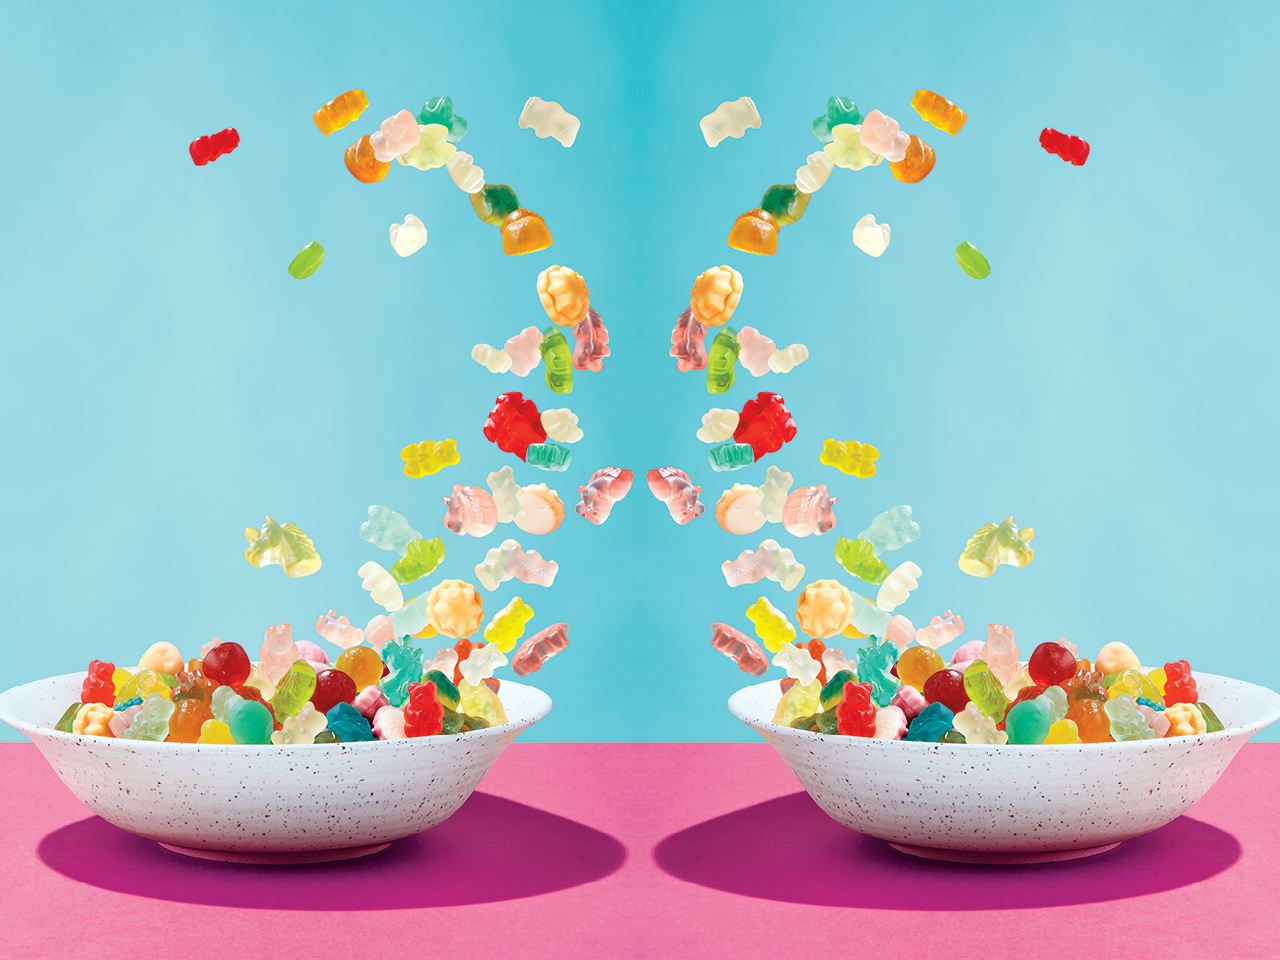 Colourful weed gummies flying out of two bowls